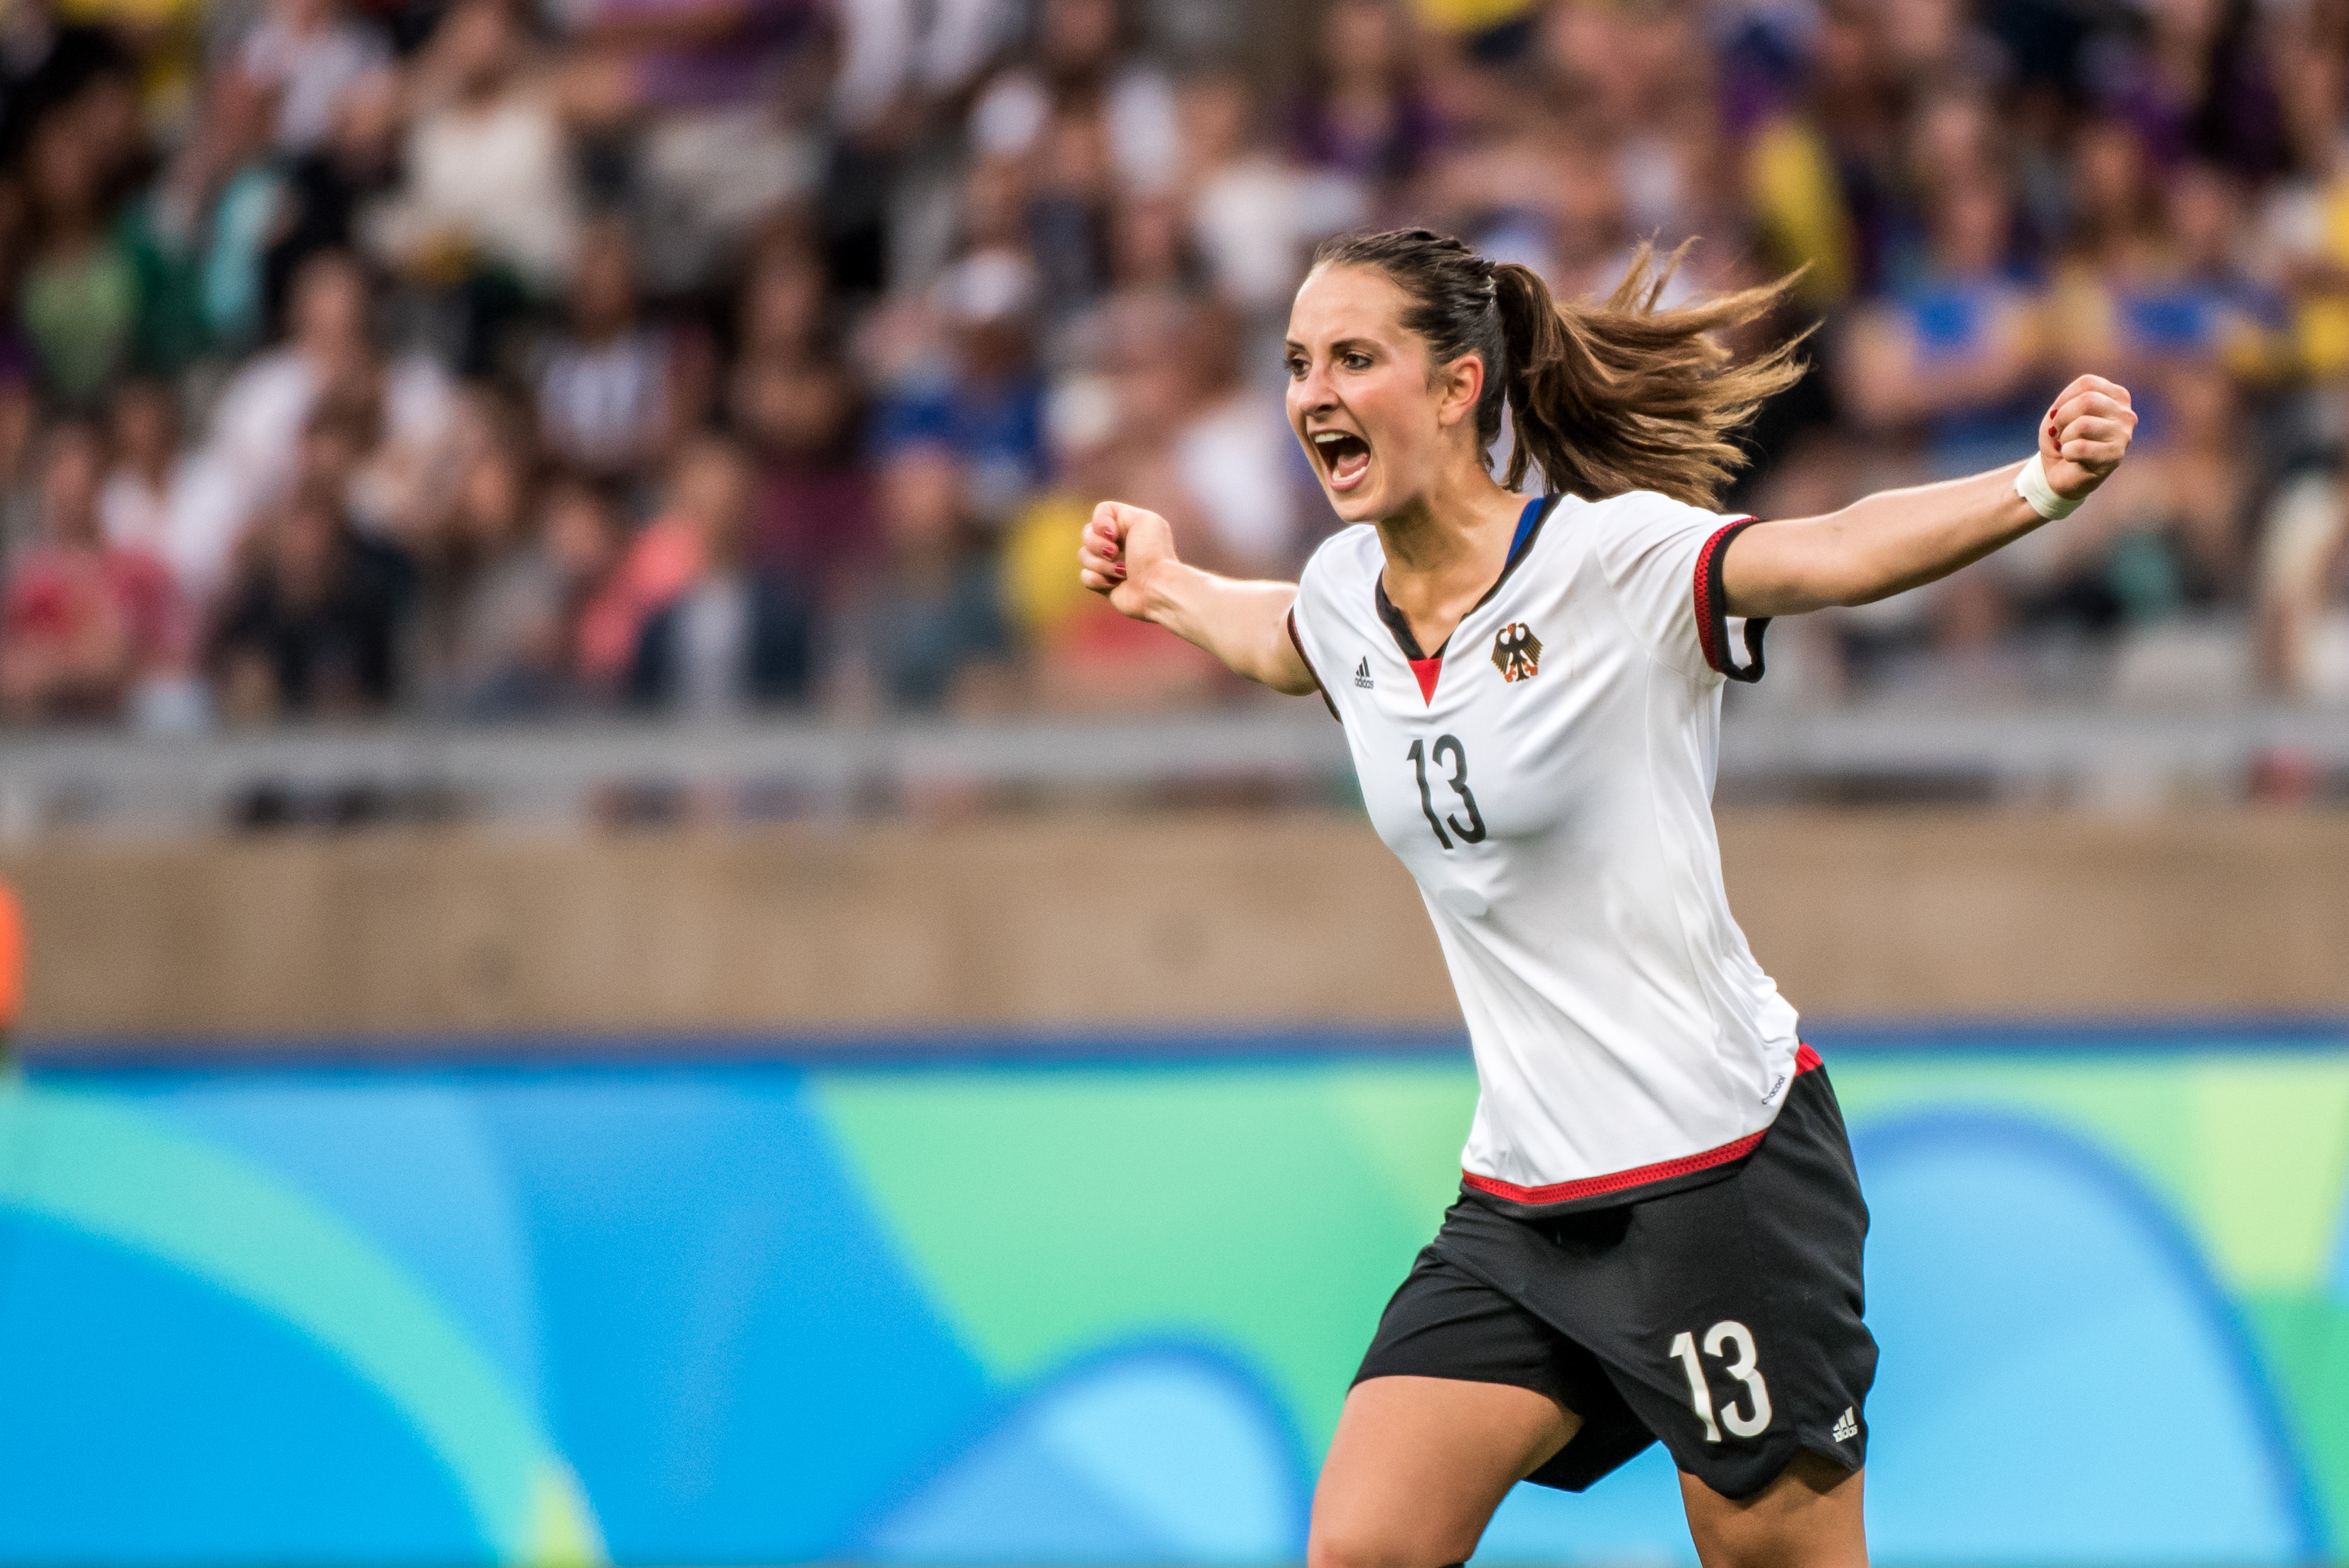 http://www.fourfourtwo.com/us/features/germany-vs-sweden-rio-2016-olympics-womens-soccer-gold-medal-final-preview